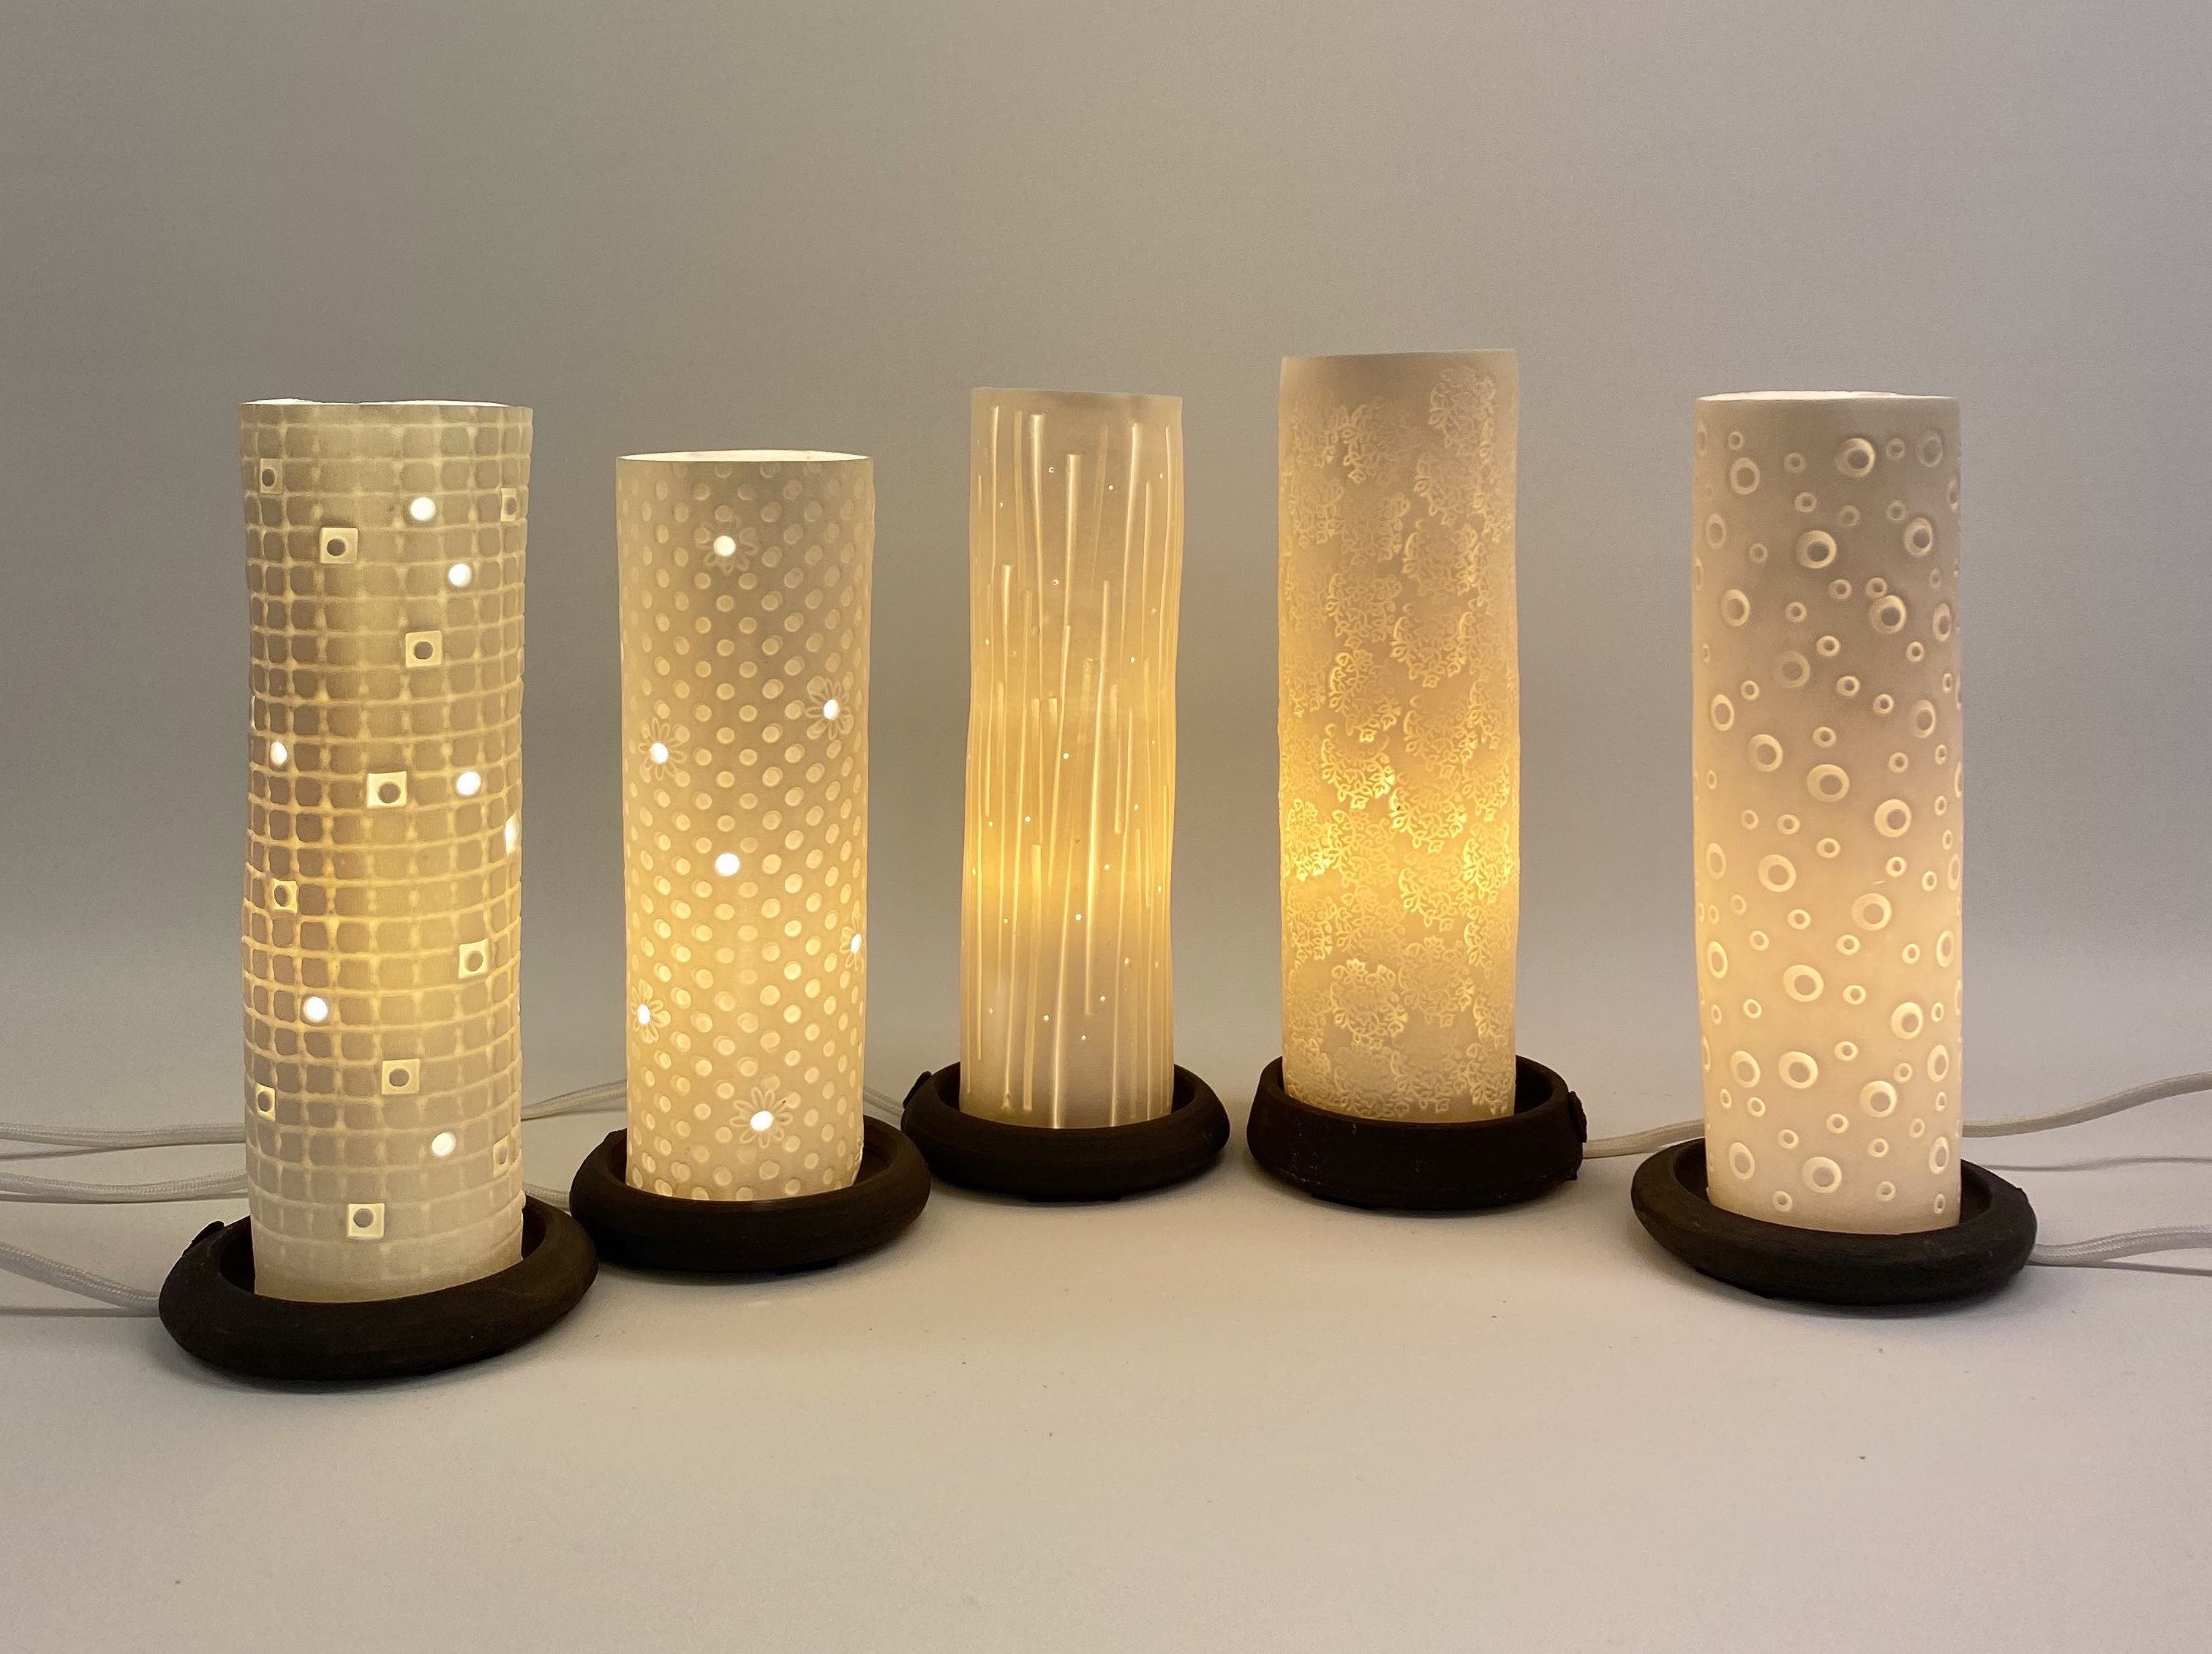 Five cylinder shaped table lamps with abstract patterns